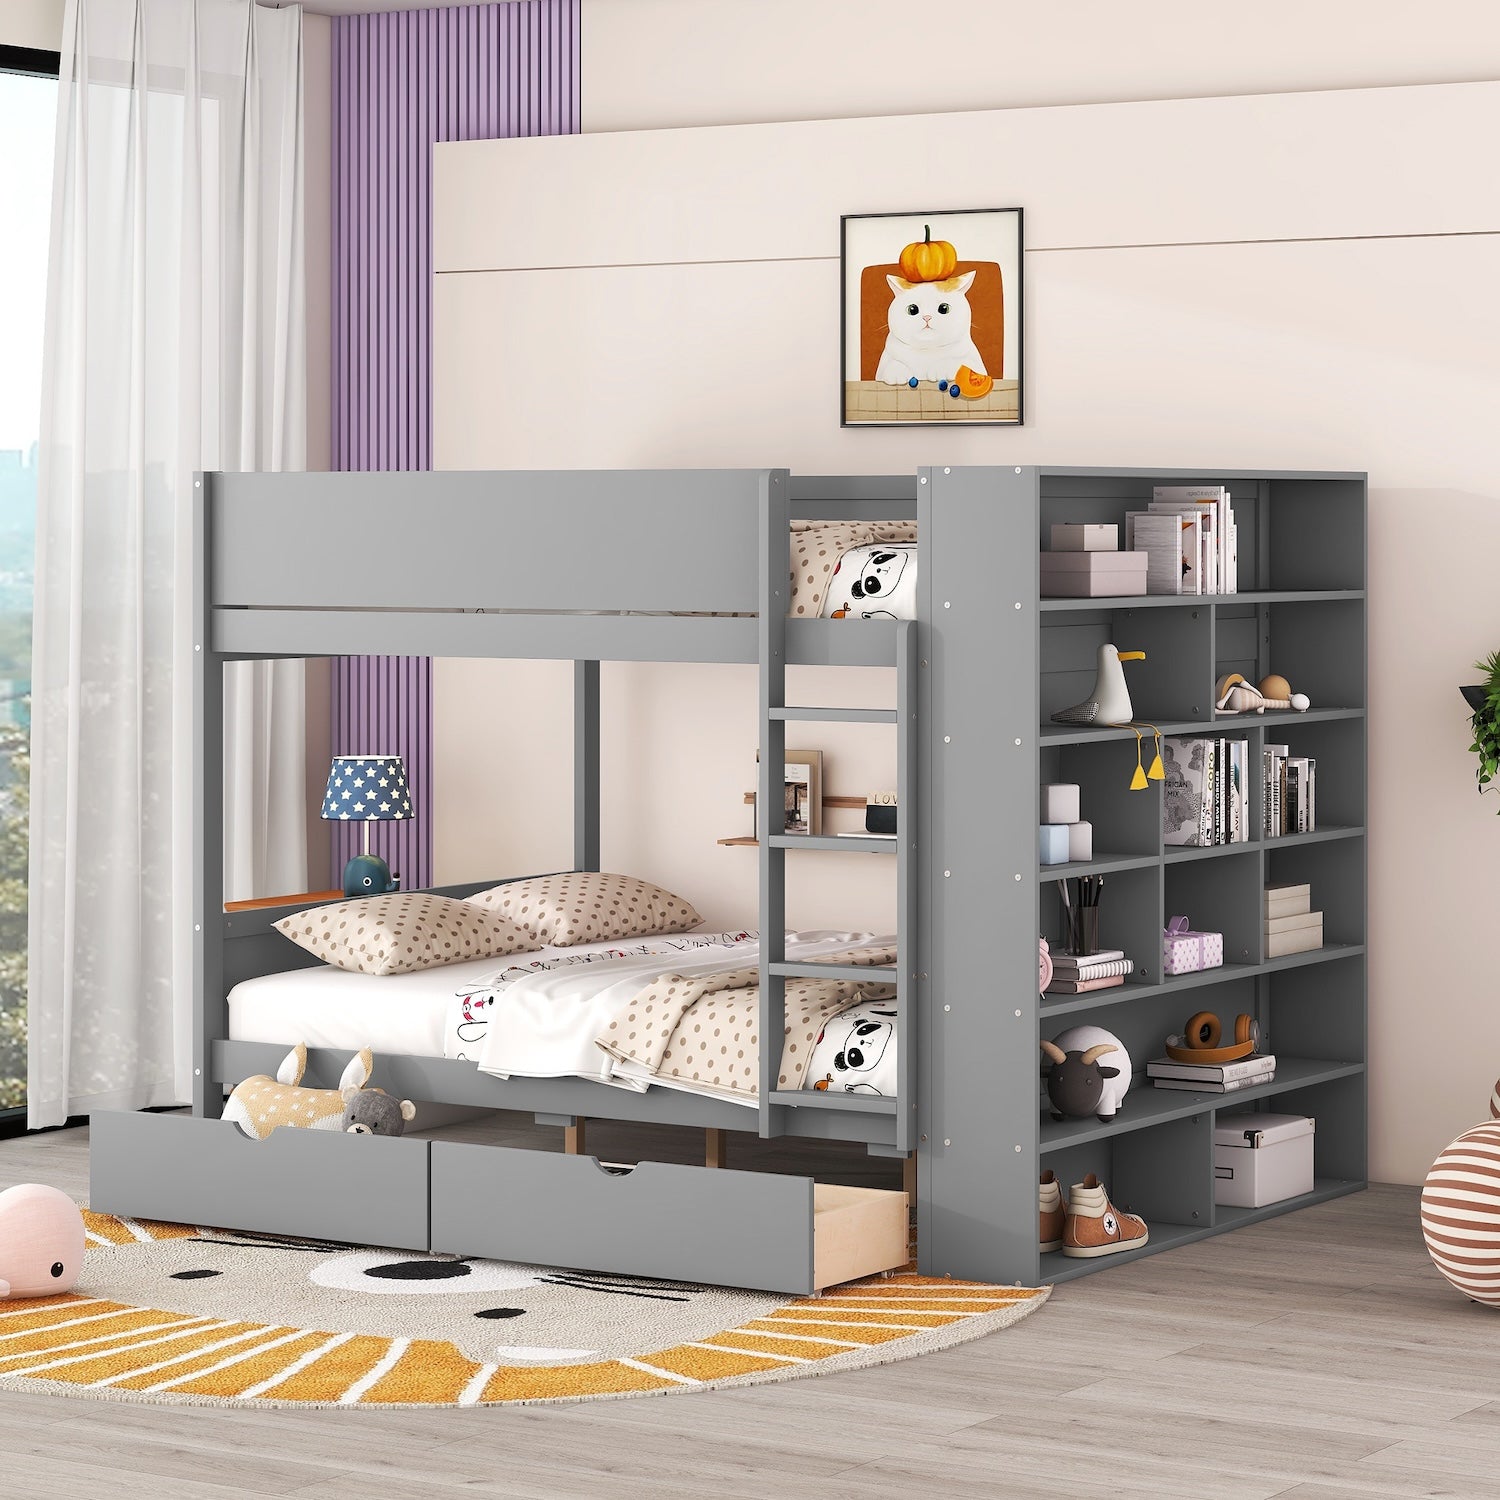 Gala Full over Full Bunk Bed with 2 Drawers & Cabinet - Gray